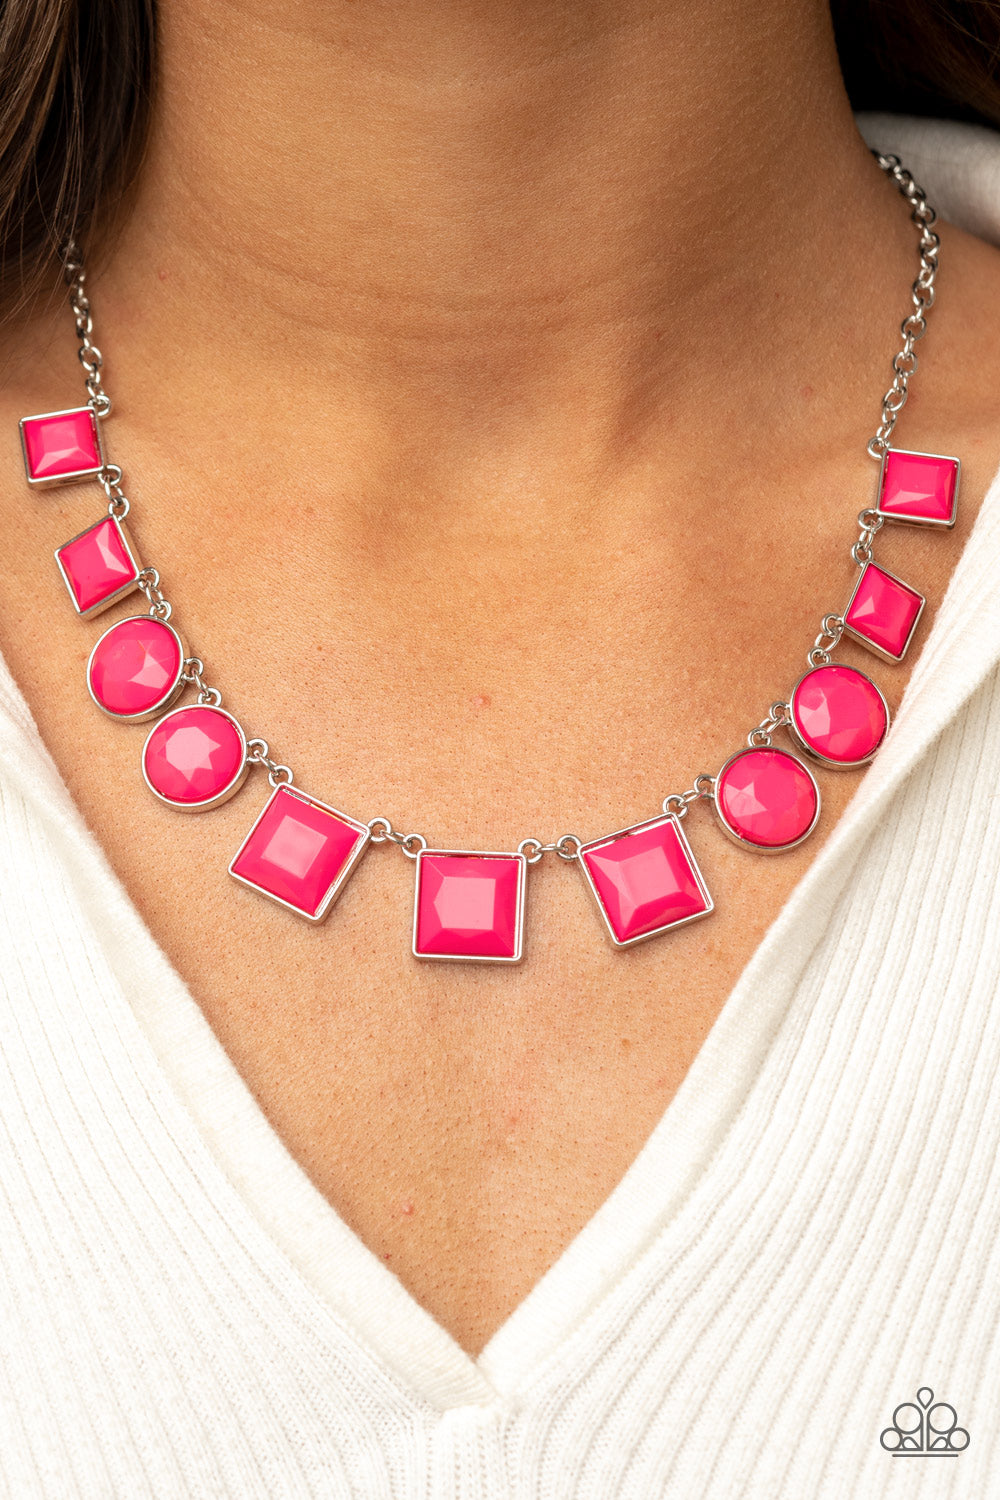 PRE-ORDER - Paparazzi Tic Tac TREND - Pink - Necklace & Earrings - $5 Jewelry with Ashley Swint